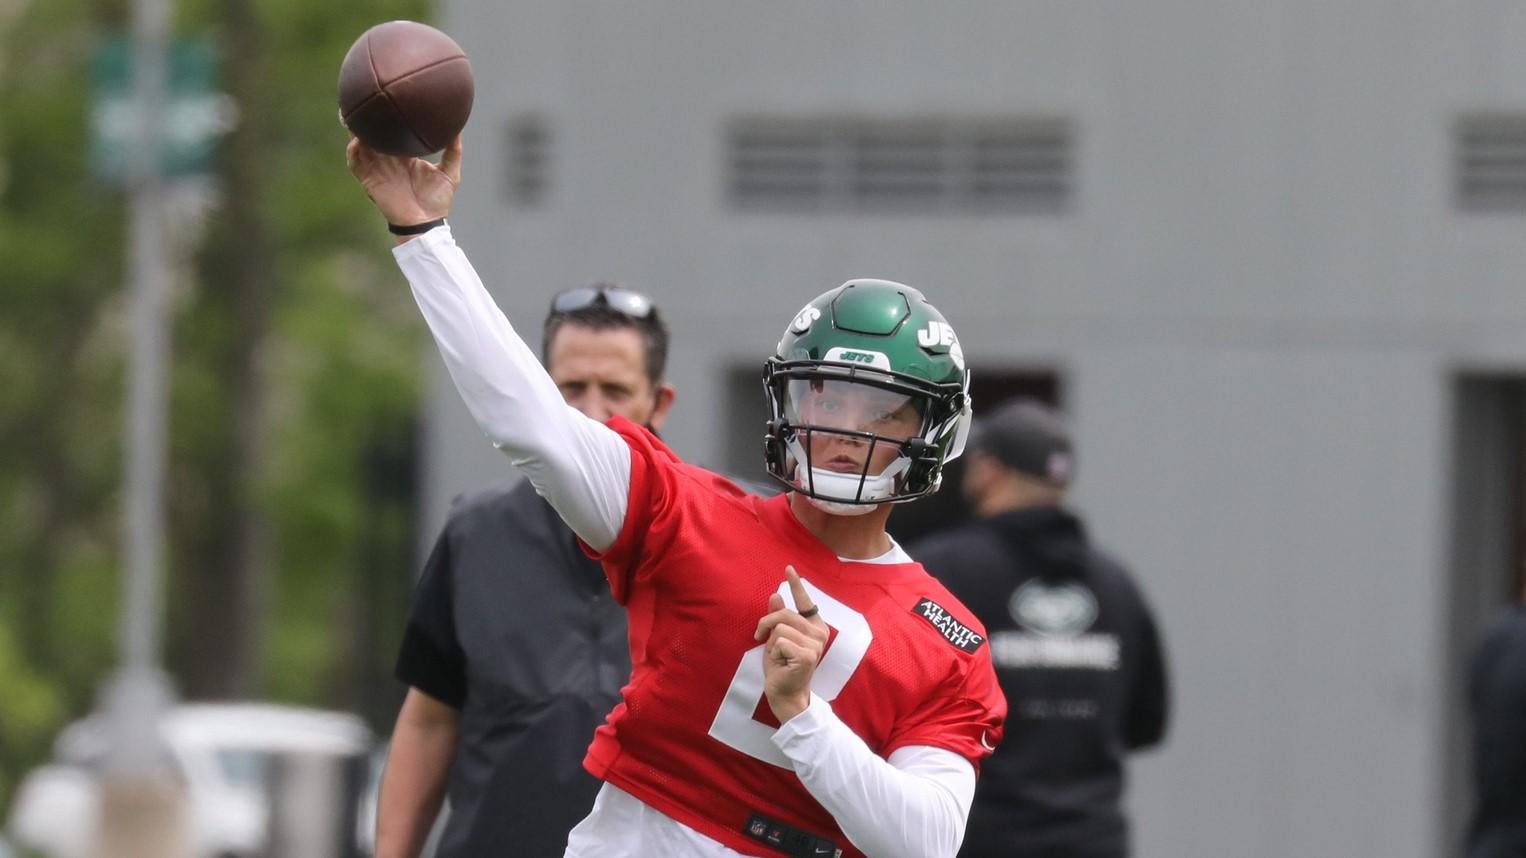 The new Jets quarterback Zach Wilson at the NY Jets rookie mini camp in Florham Park, NJ on May 7, 2021. / Chris Pedota, NorthJersey.com